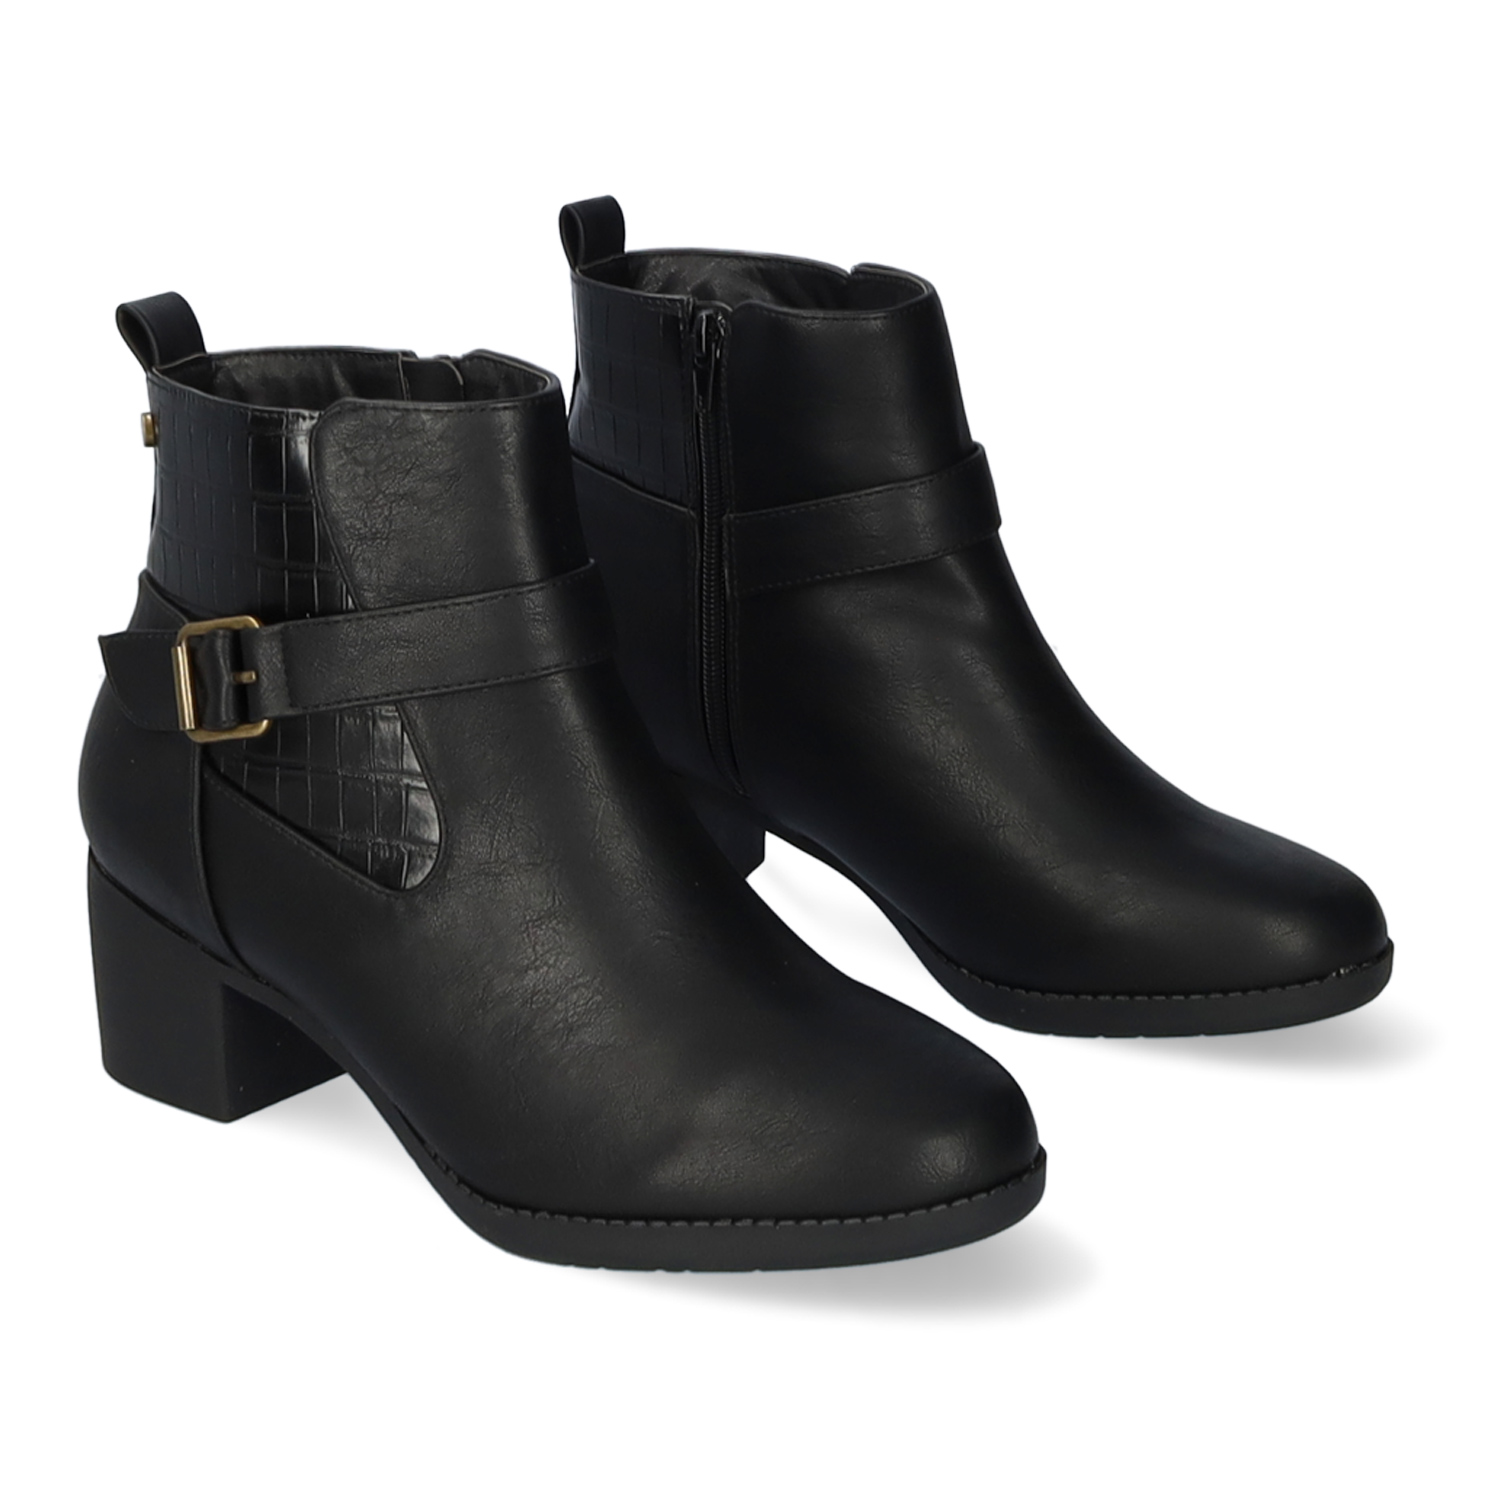 Heeled booties in black faux leather 